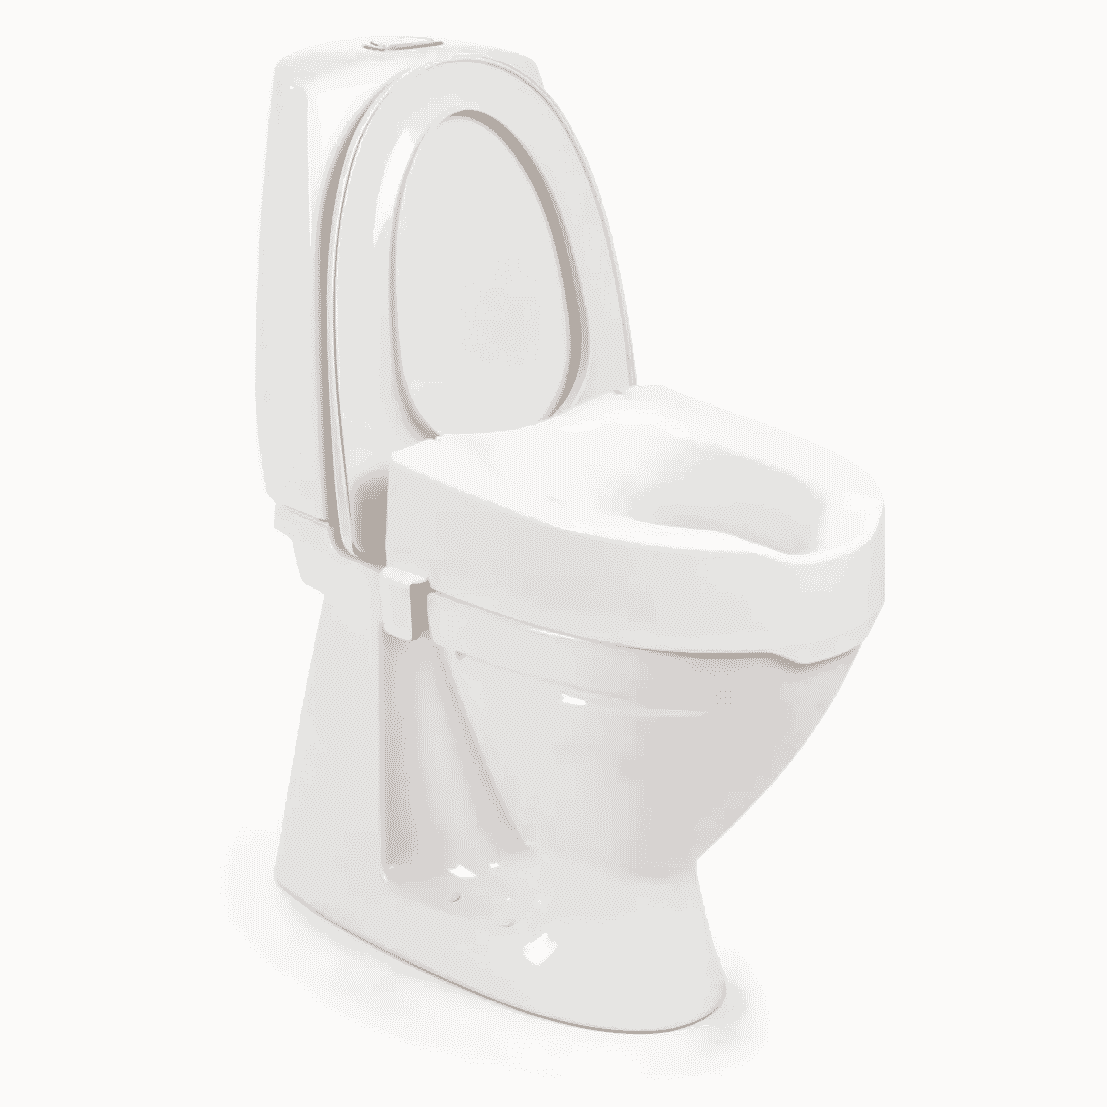 View MyLoo Raised Toilet Seat With Brackets 10cm information